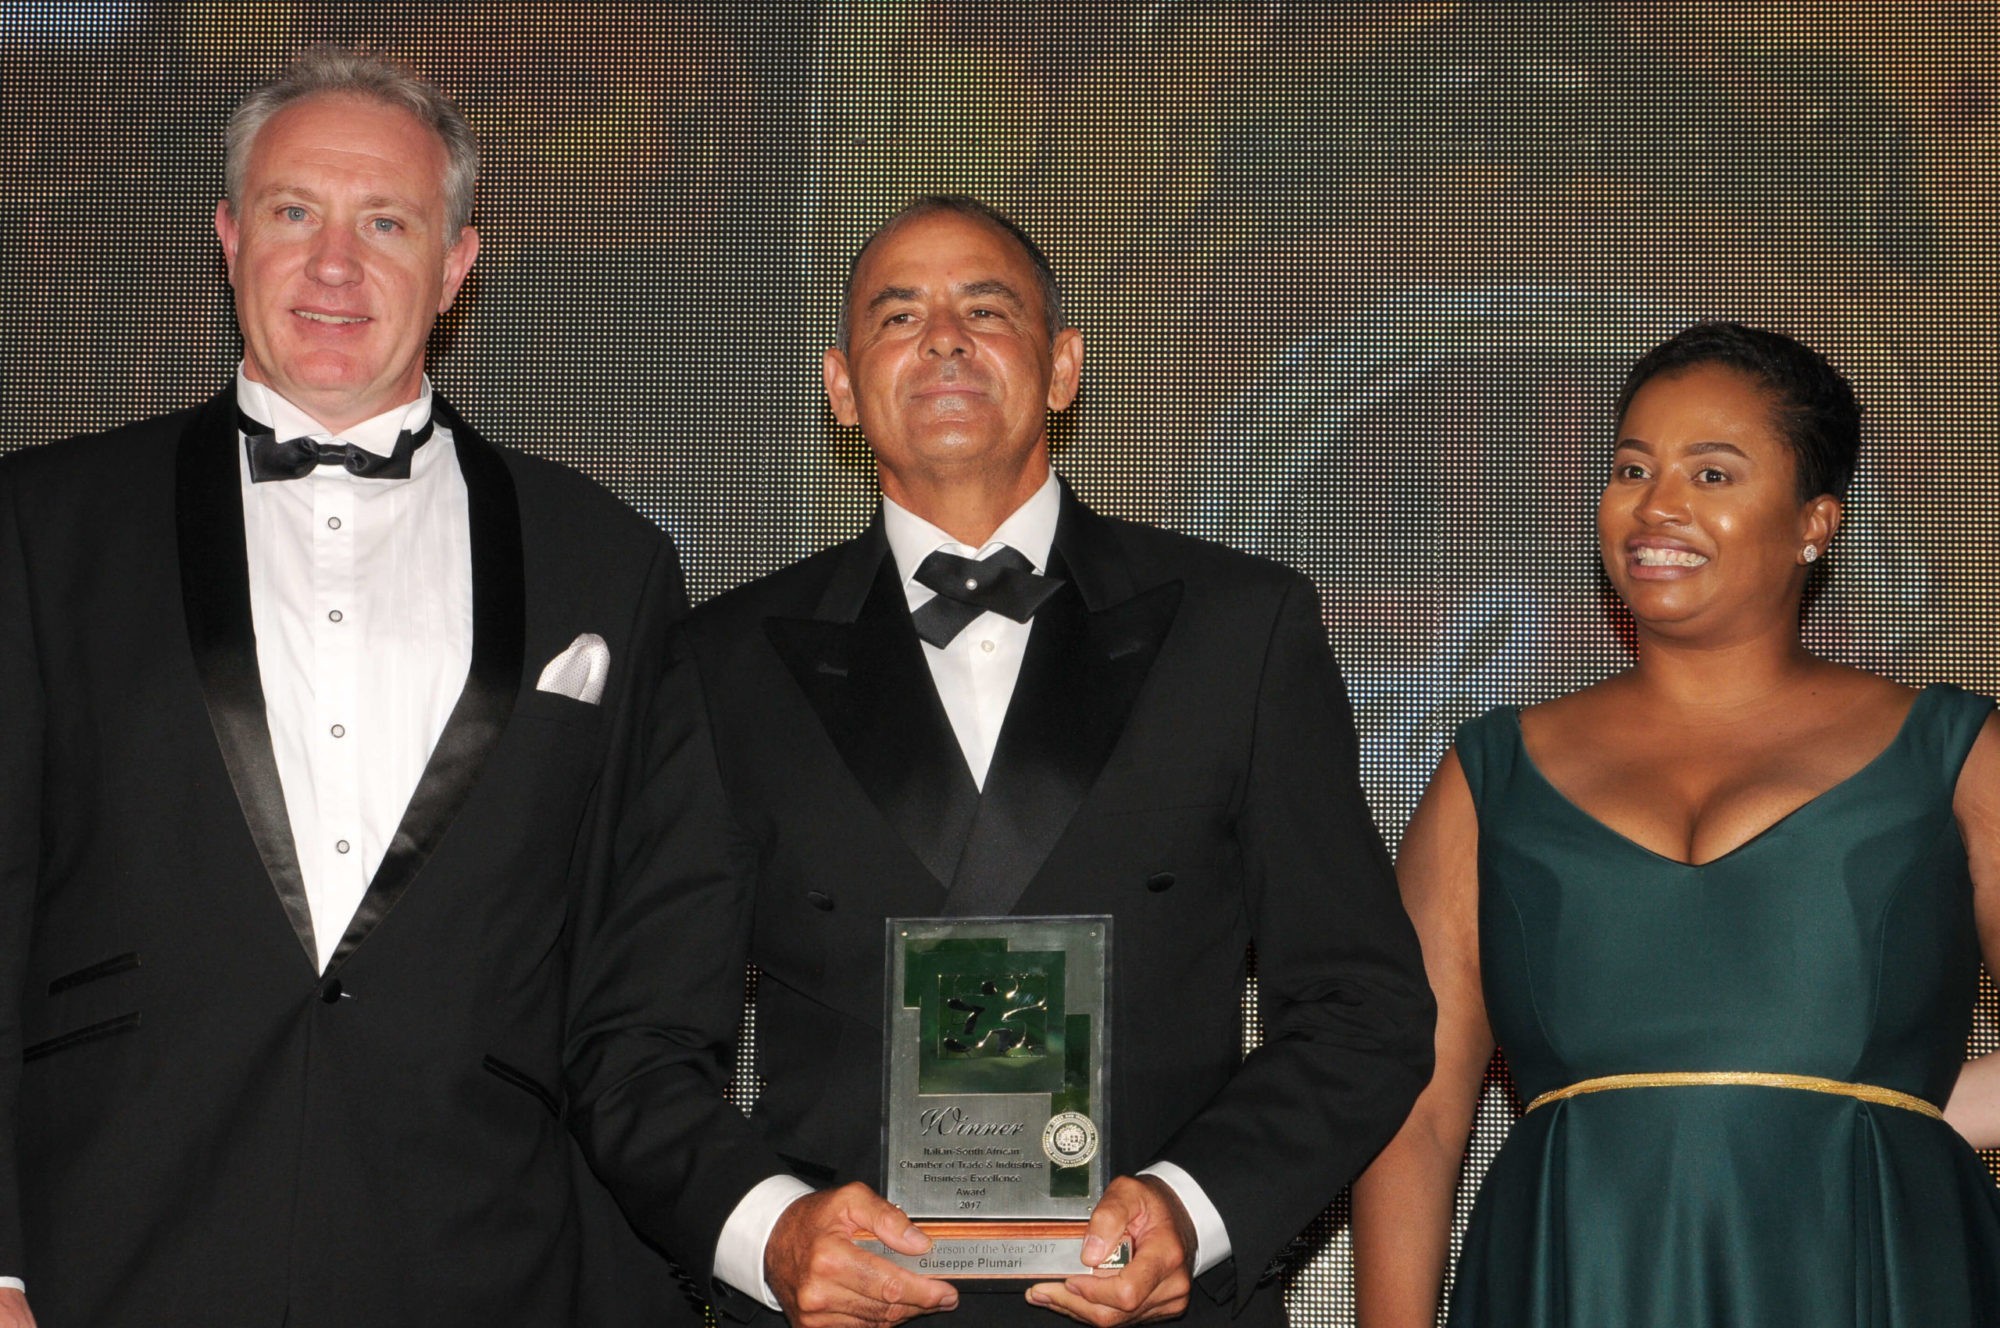 Giuseppe Plumari, CEO of Steyn City Properties, has been named Business Person of the Year at the Nedbank Business Excellence Awards 2017, hosted by the Italian-South Africa Chamber of Commerce and Industries at a gala dinner last night at the Wanderers Club in Illovo, Johannesburg.